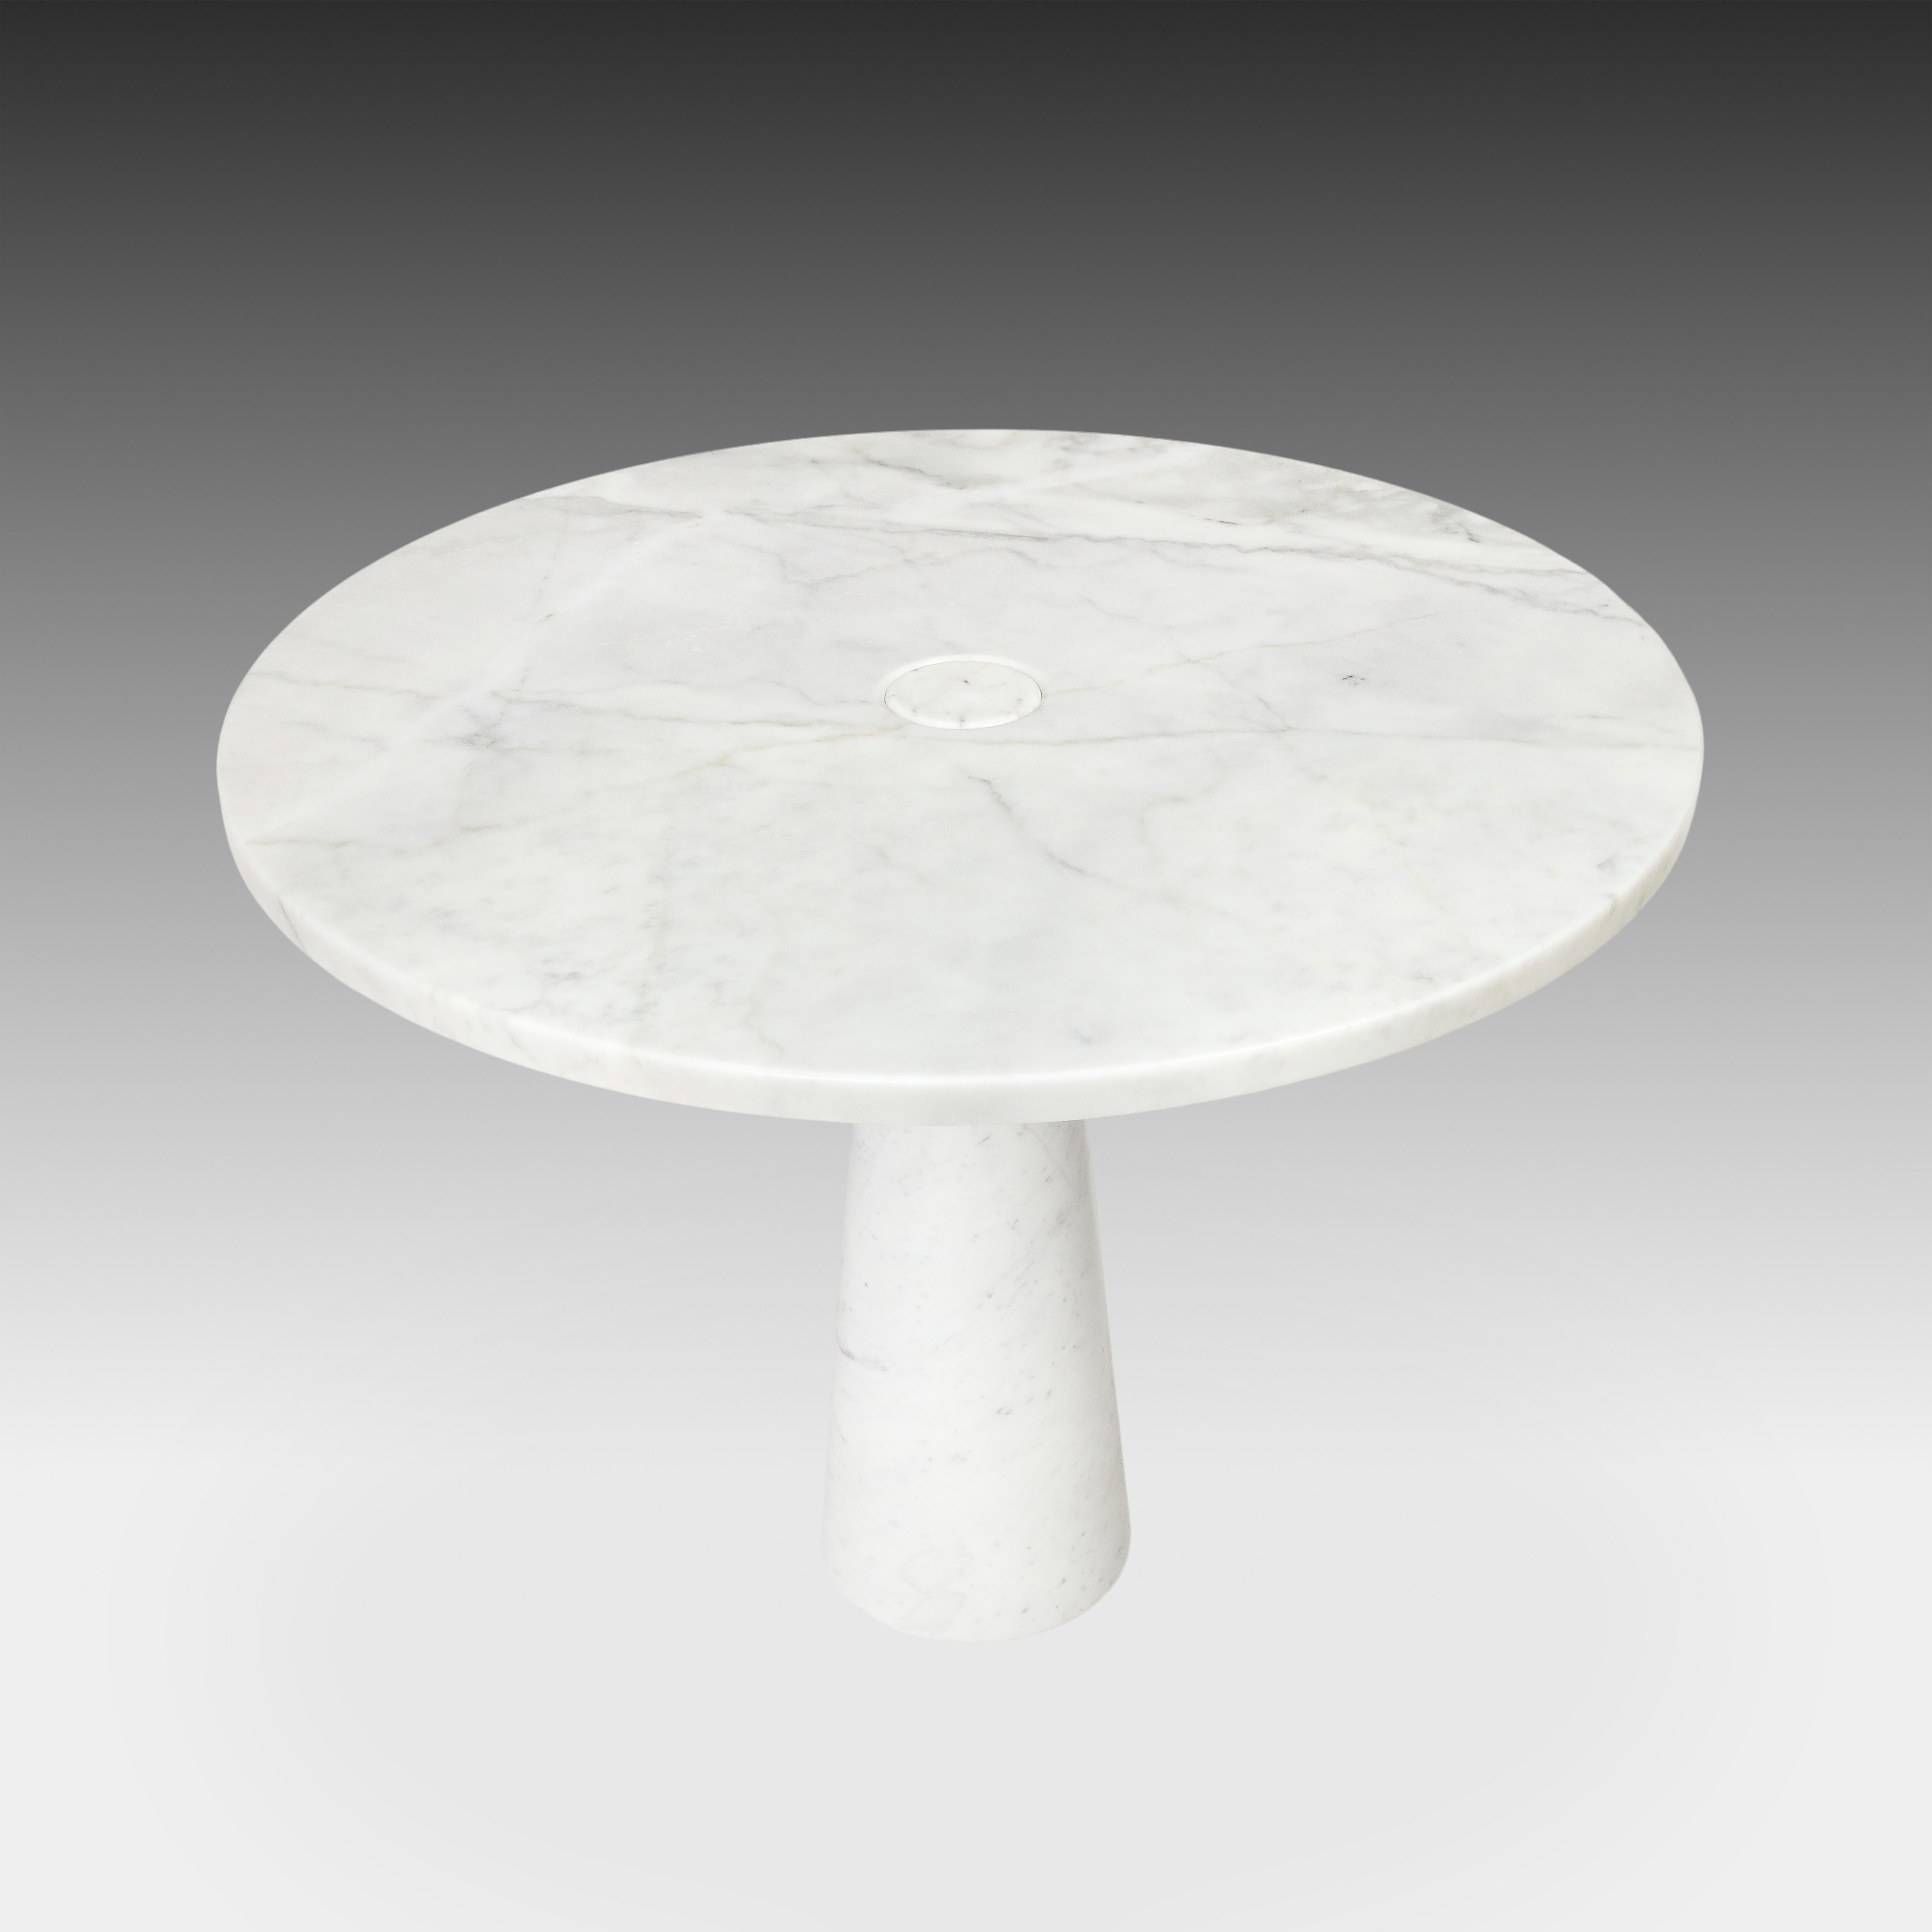 Mid-Century Modern Angelo Mangiarotti for Skipper Eros Carrara Marble Center or Dining Table, 1971 For Sale